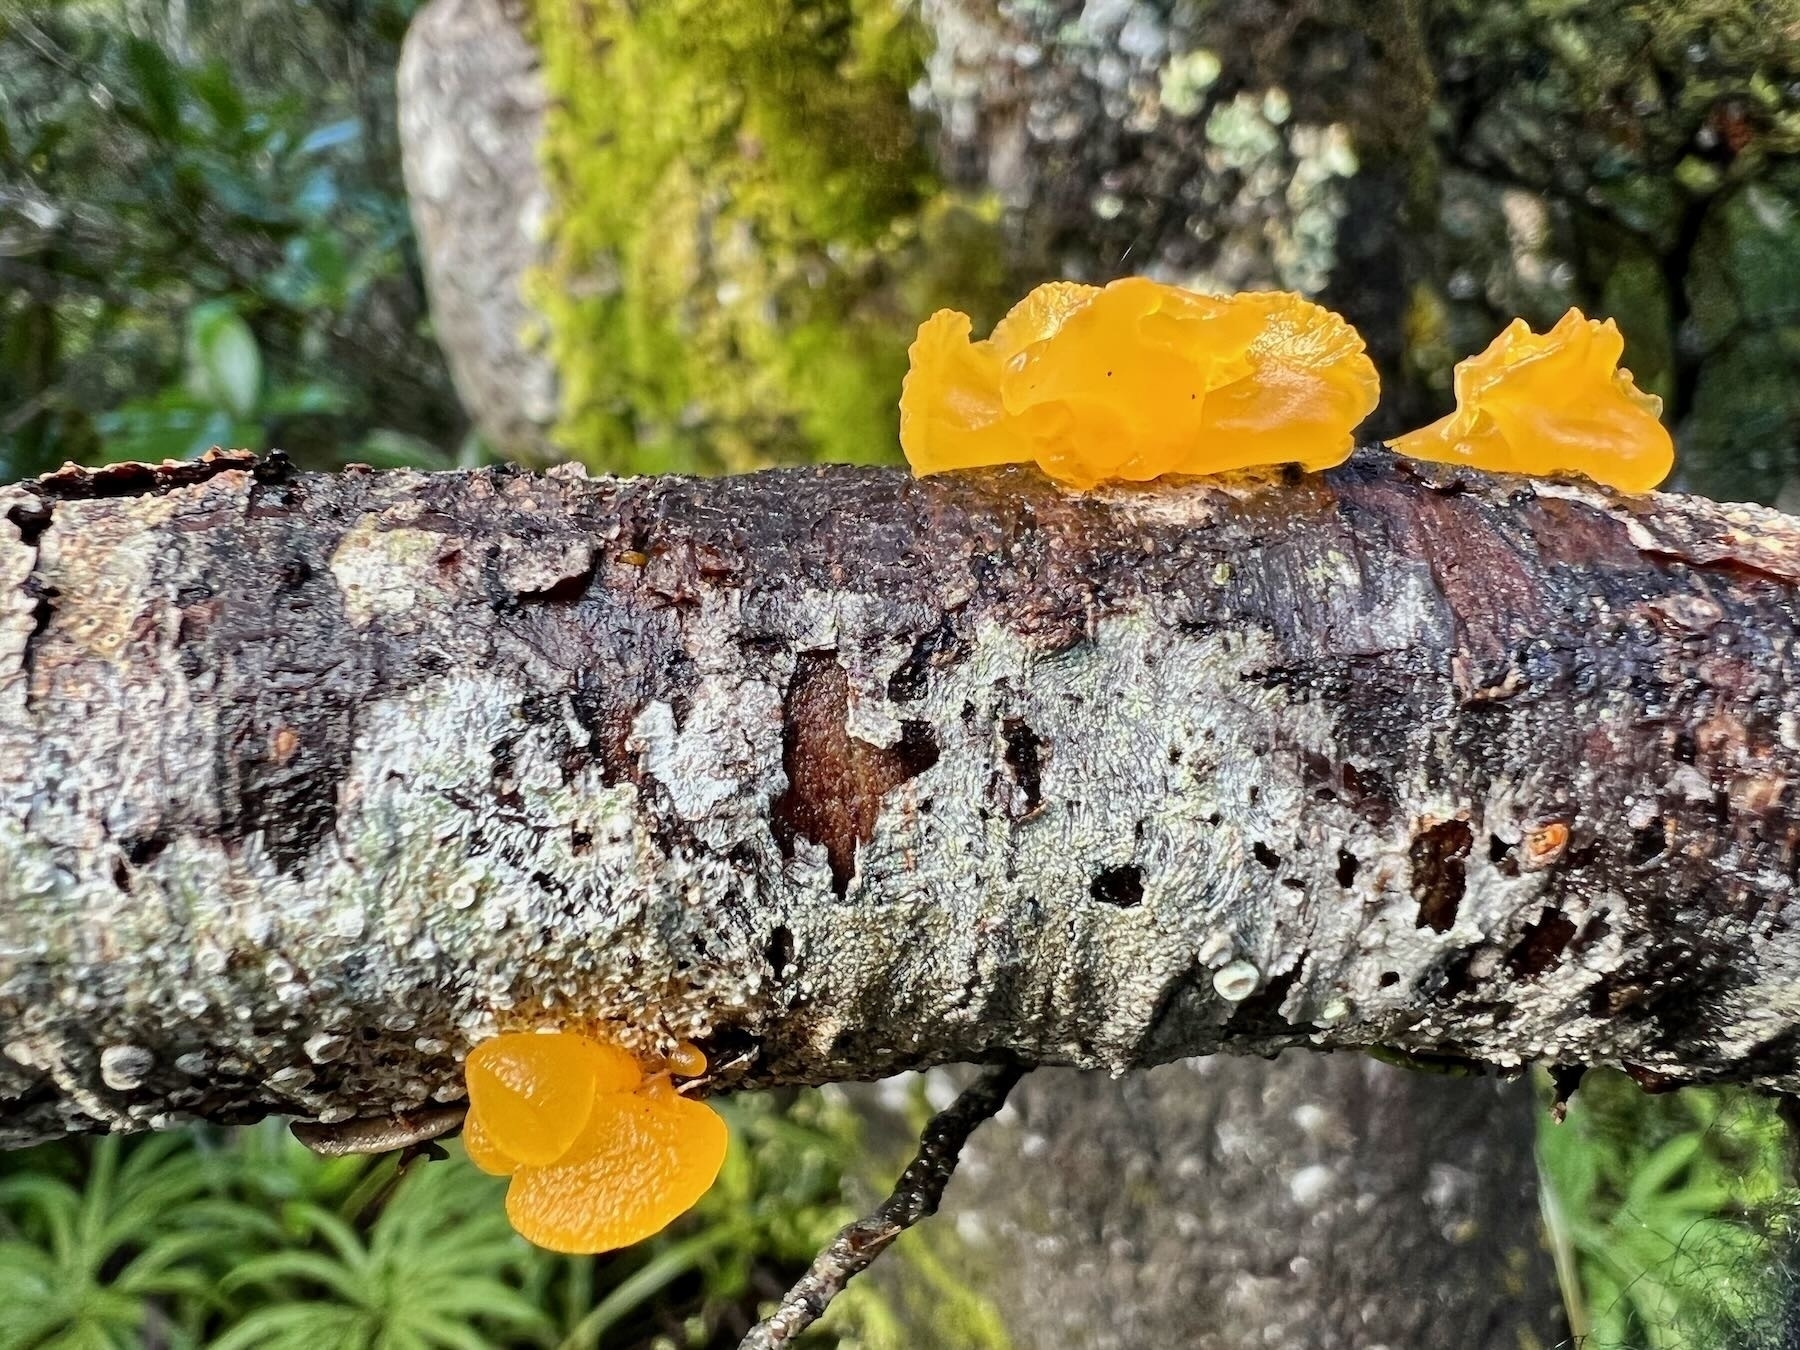 Weird bright yellow fungi that look like lollies on a small branch. 